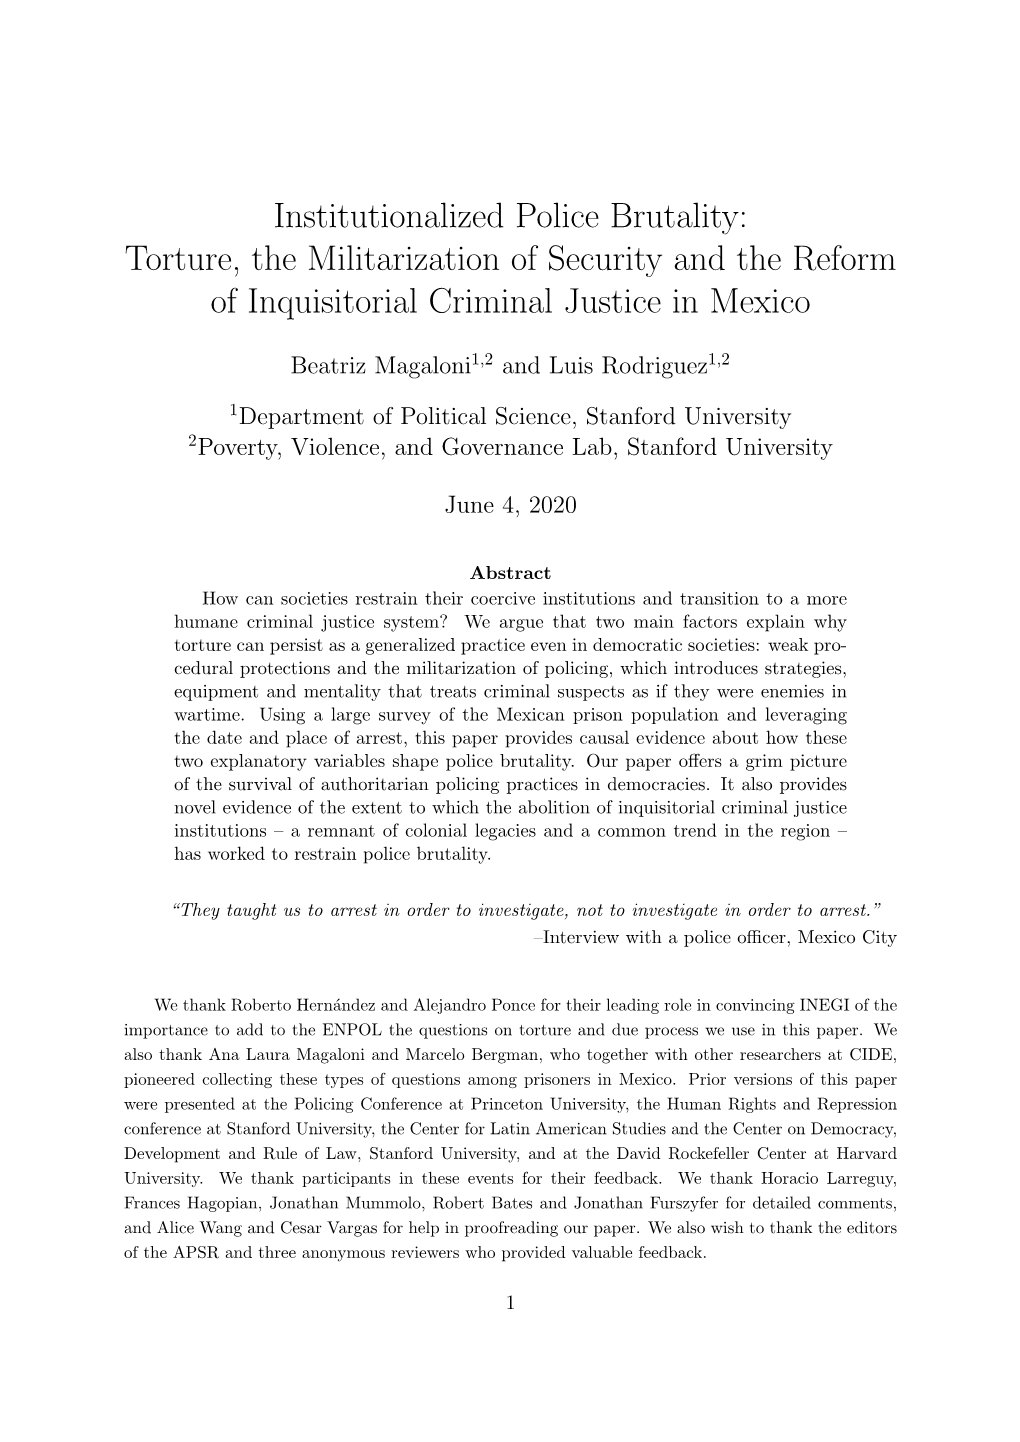 Institutionalized Police Brutality: Torture, the Militarization of Security and the Reform of Inquisitorial Criminal Justice in Mexico